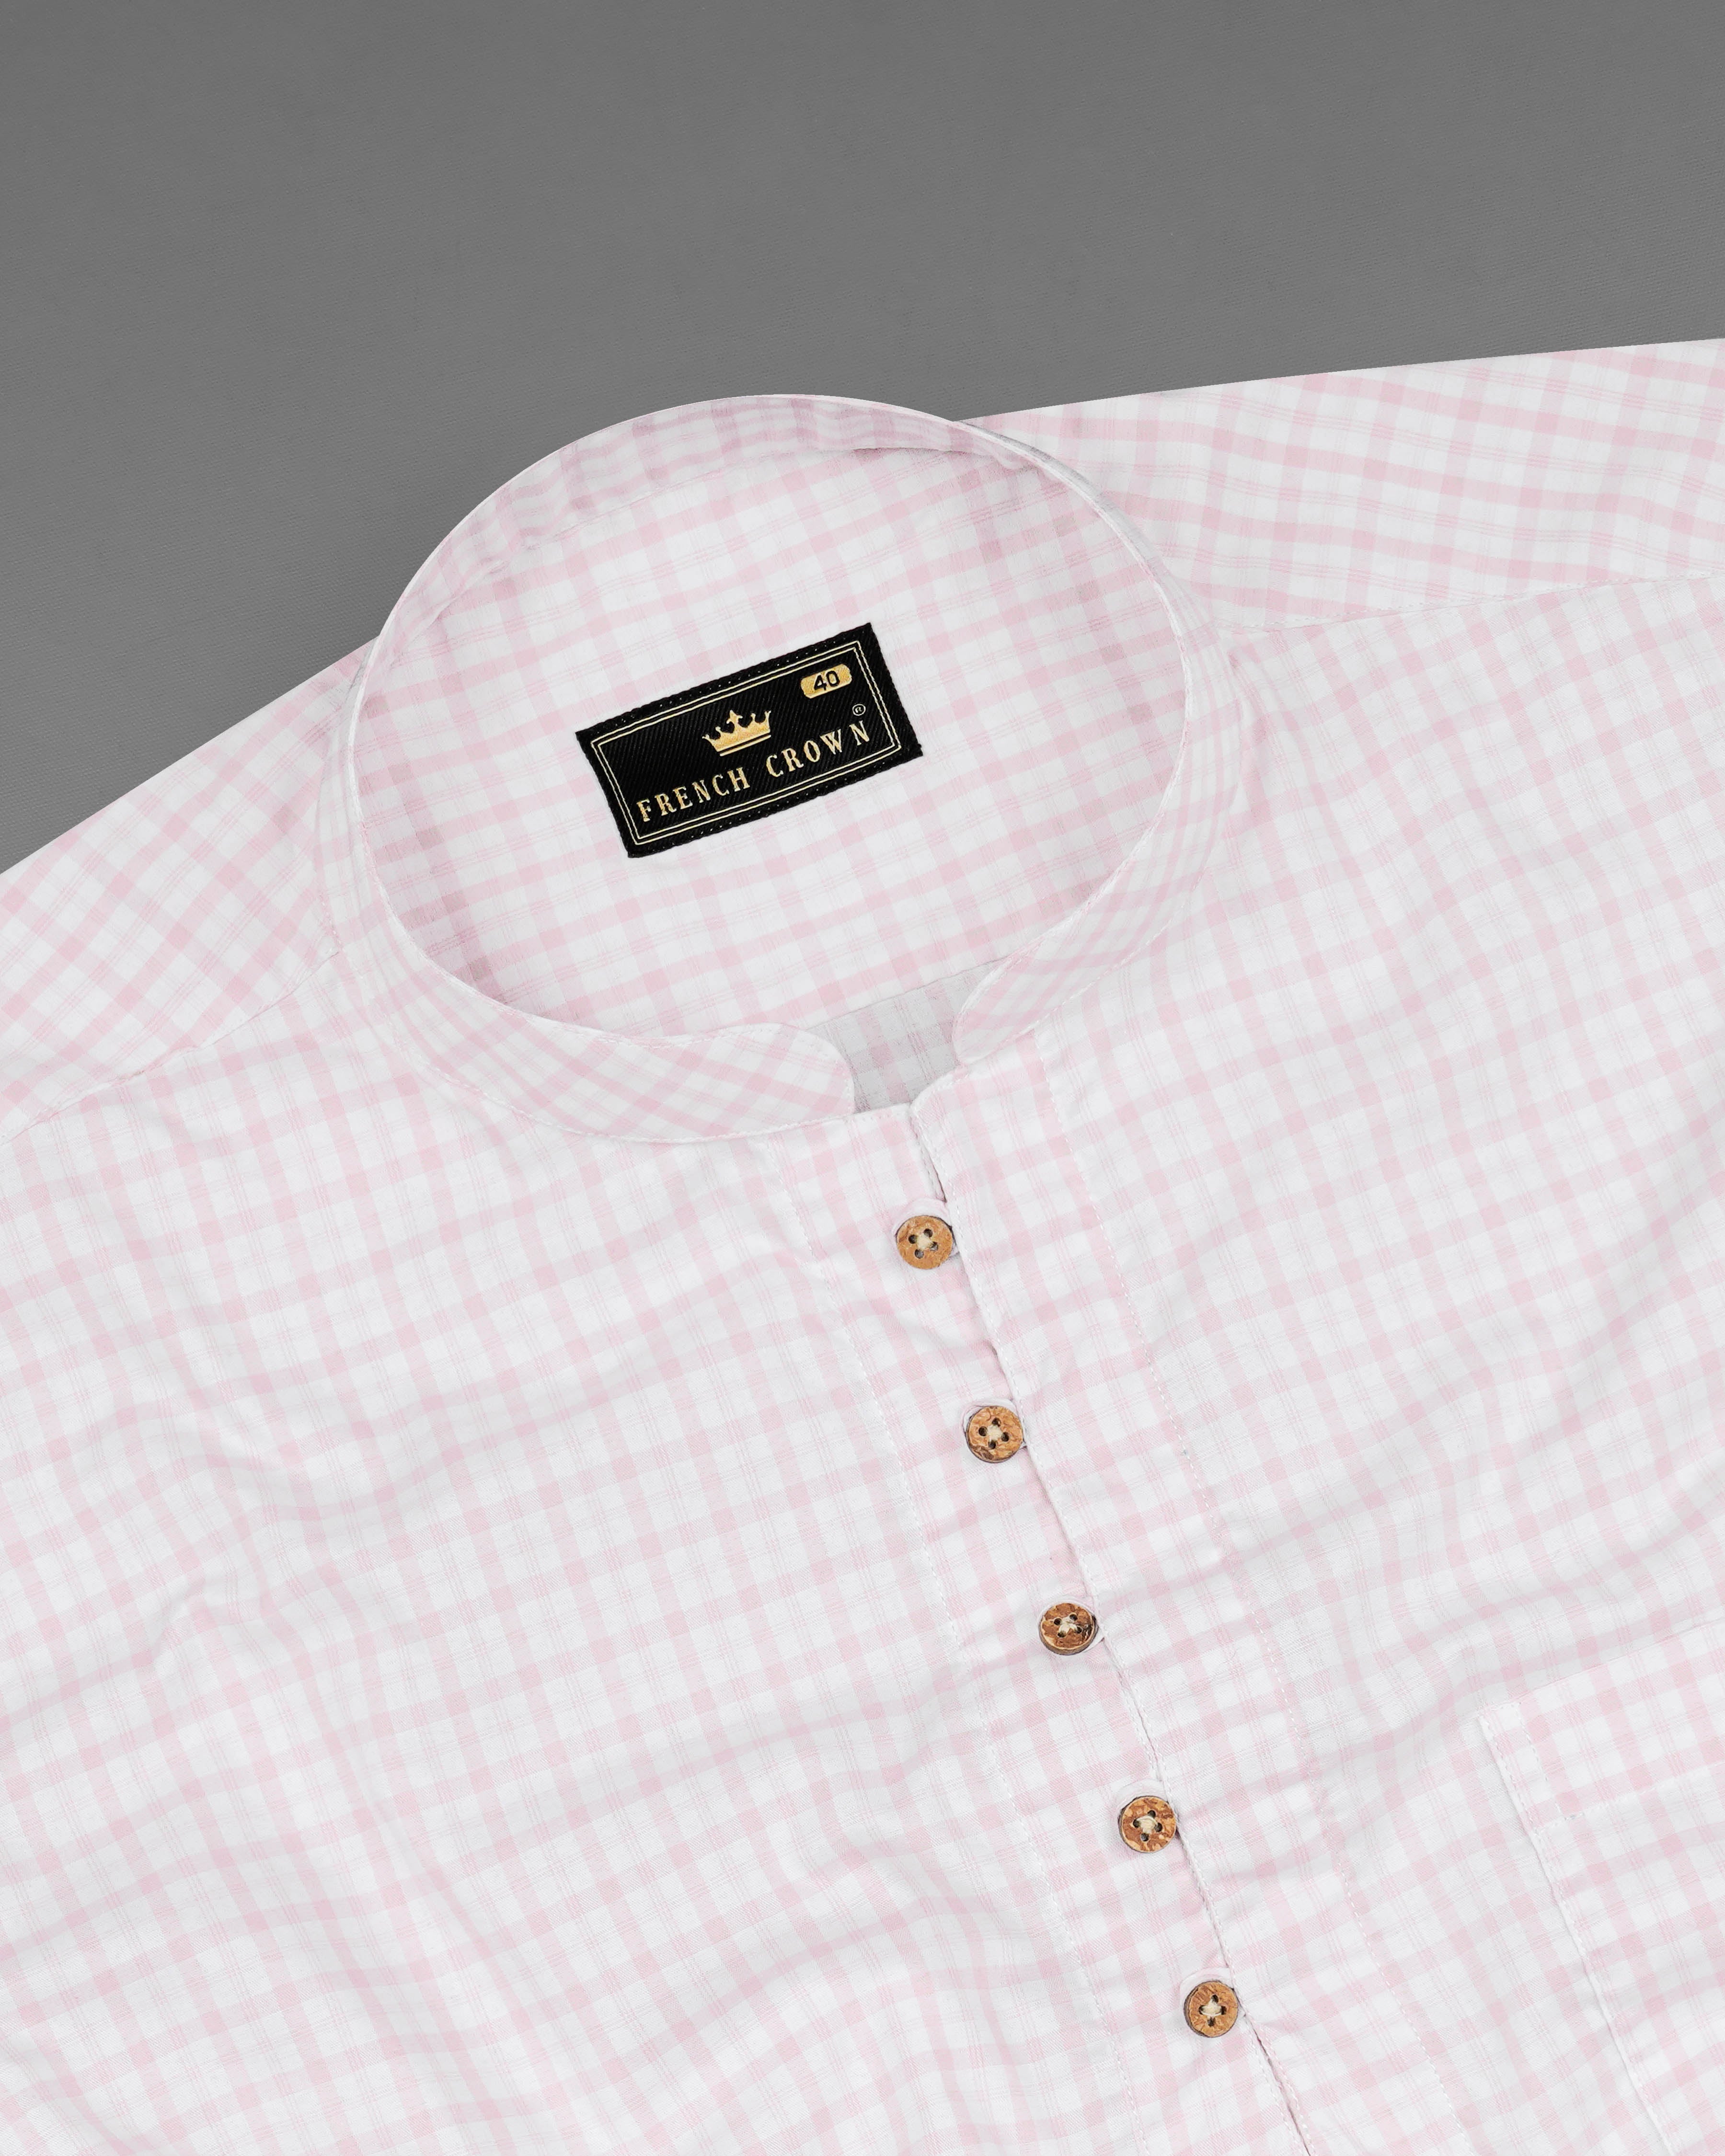 Bright White and Twilight Pink Checkered Premium Cotton Kurta Shirt 8148-KS-38, 8148-KS-H-38, 8148-KS-39, 8148-KS-H-39, 8148-KS-40, 8148-KS-H-40, 8148-KS-42, 8148-KS-H-42, 8148-KS-44, 8148-KS-H-44, 8148-KS-46, 8148-KS-H-46, 8148-KS-48, 8148-KS-H-48, 8148-KS-50, 8148-KS-H-50, 8148-KS-52, 8148-KS-H-52